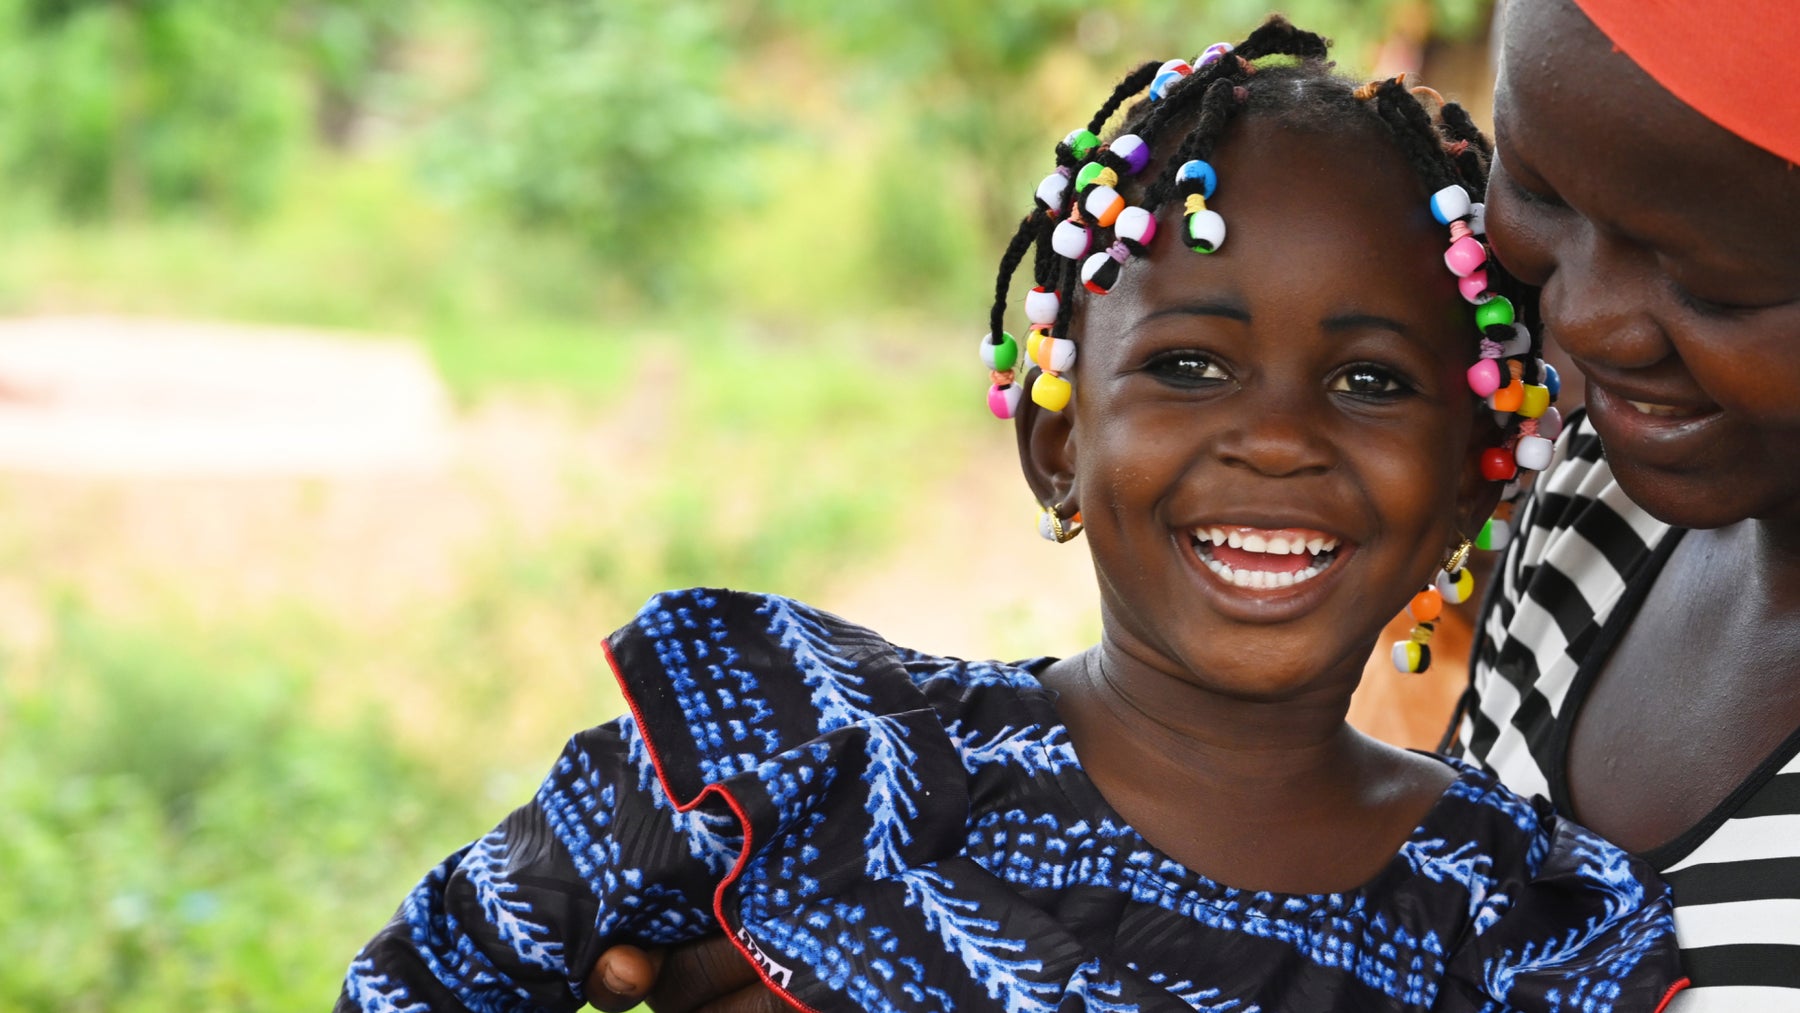 A happy girl in a village in the South of Cote d’Ivoire